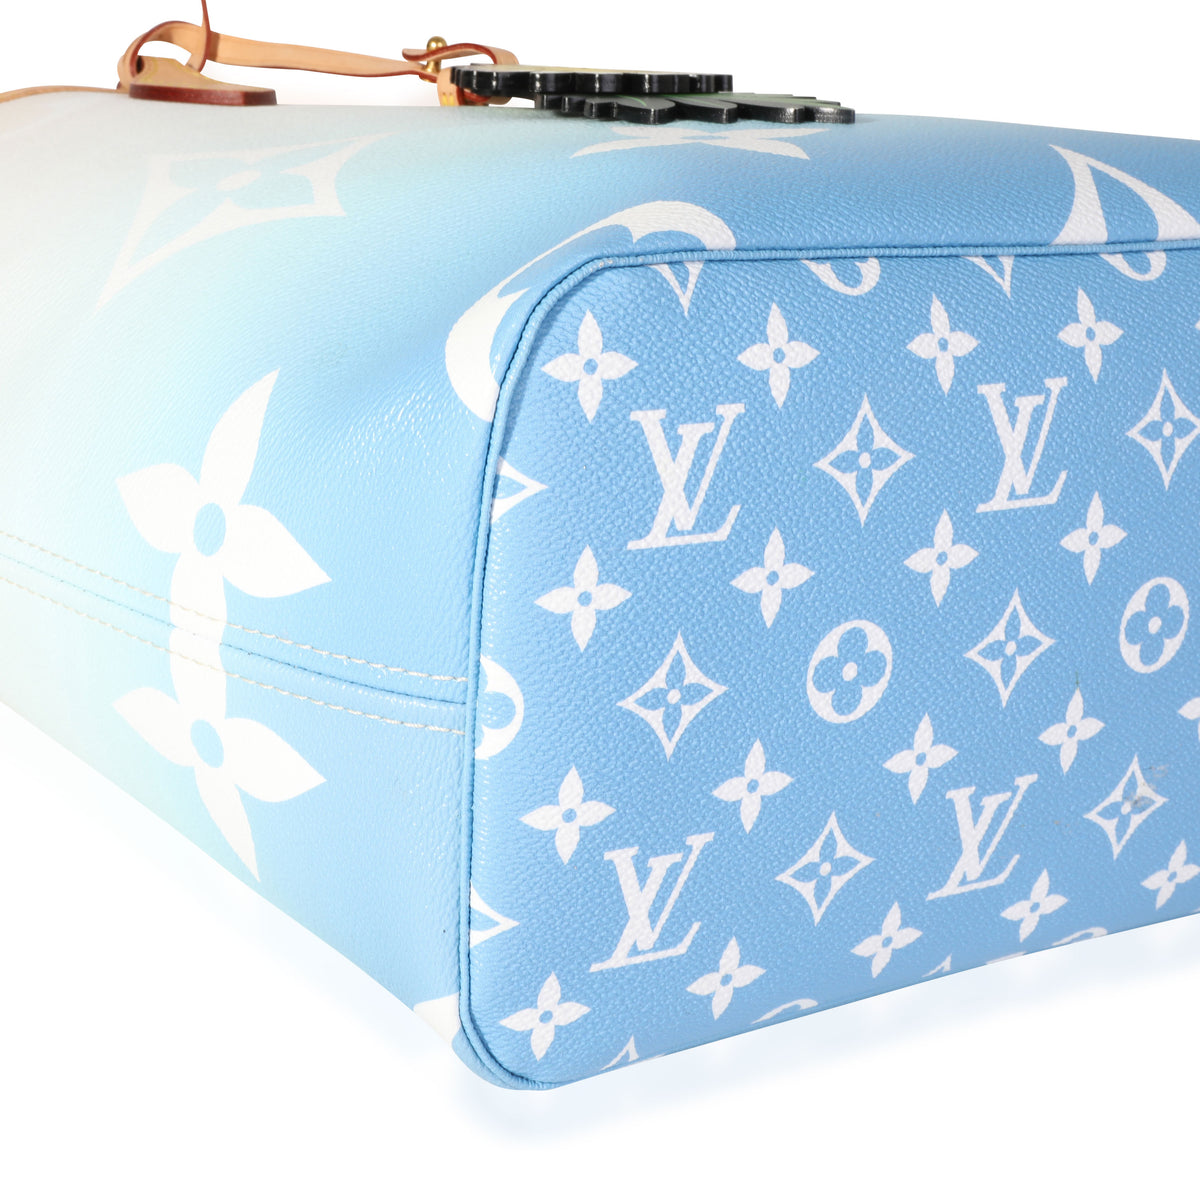 Louis Vuitton Blue White Giant Monogram Canvas By The Pool Neverfull MM, myGemma, CH